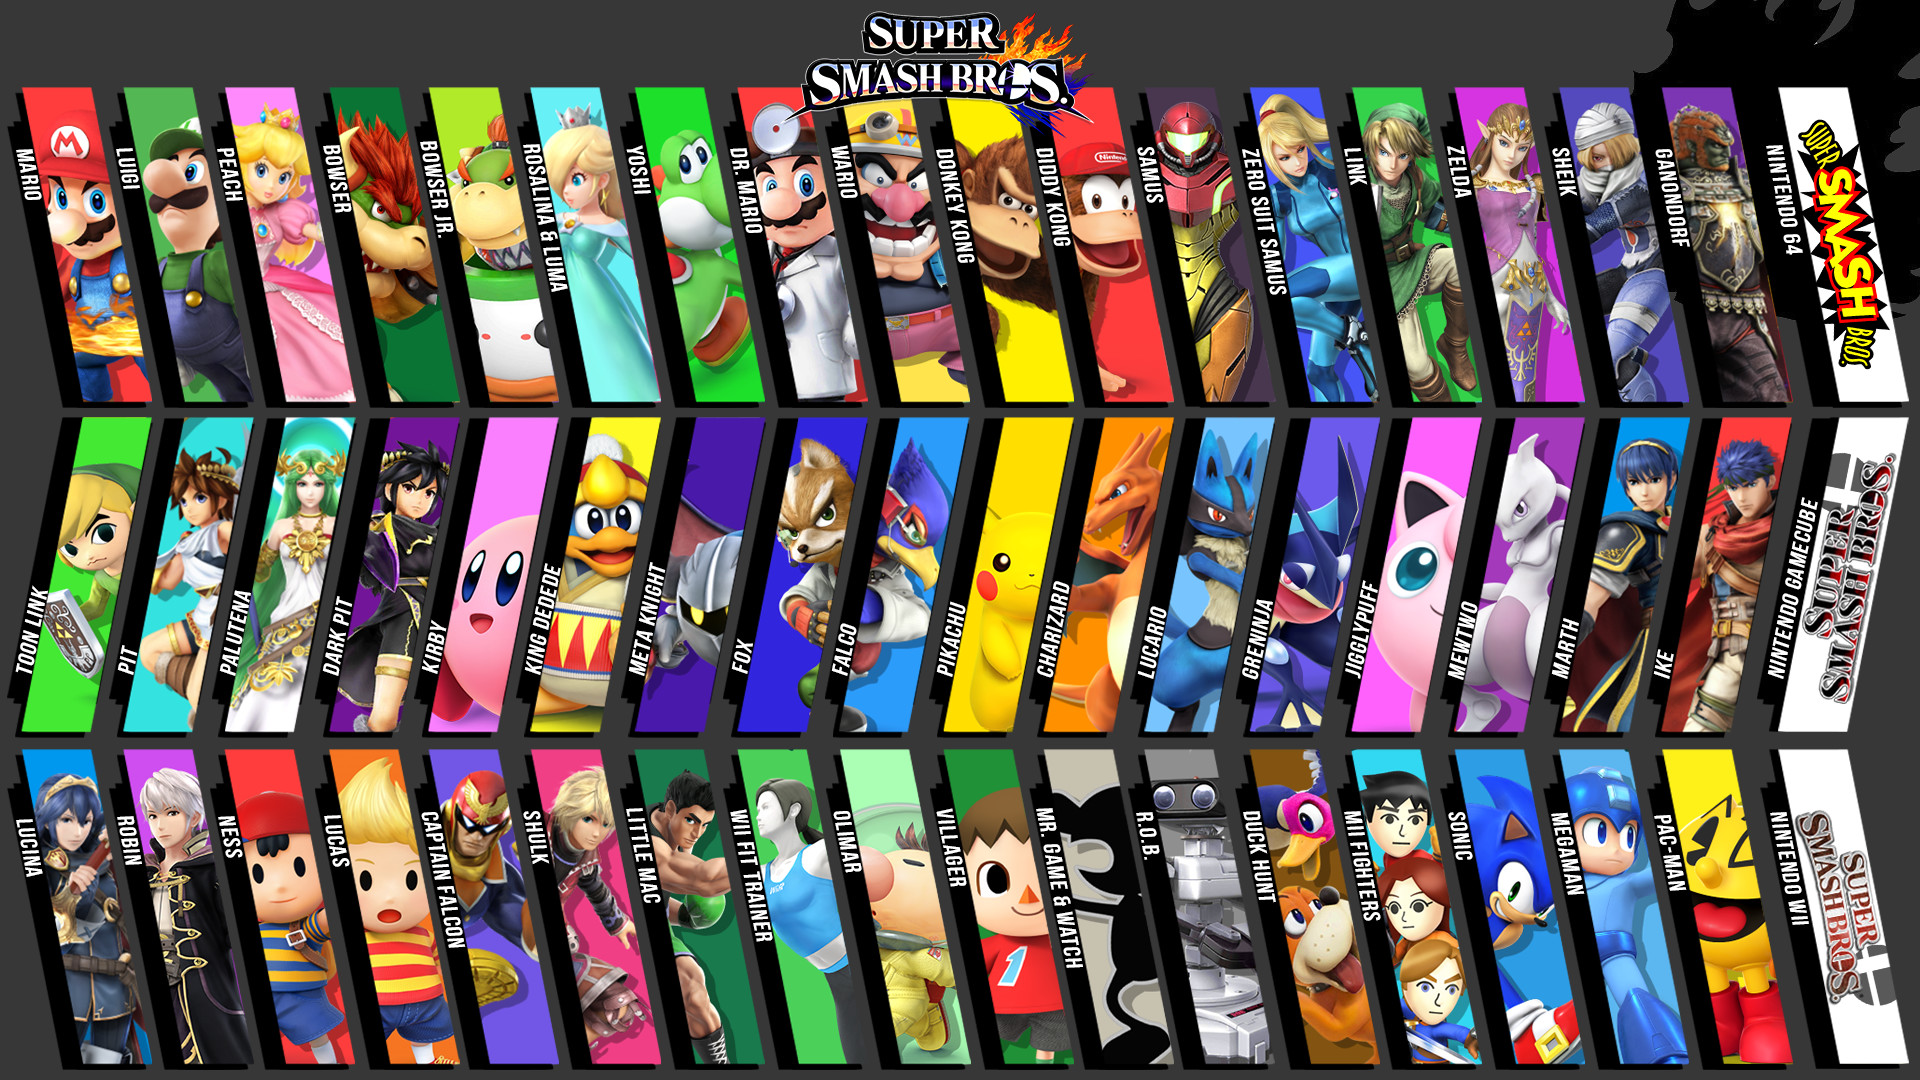 1920x1080 Super Smash r Nintendo DS and Wii U Computer Wallpapers